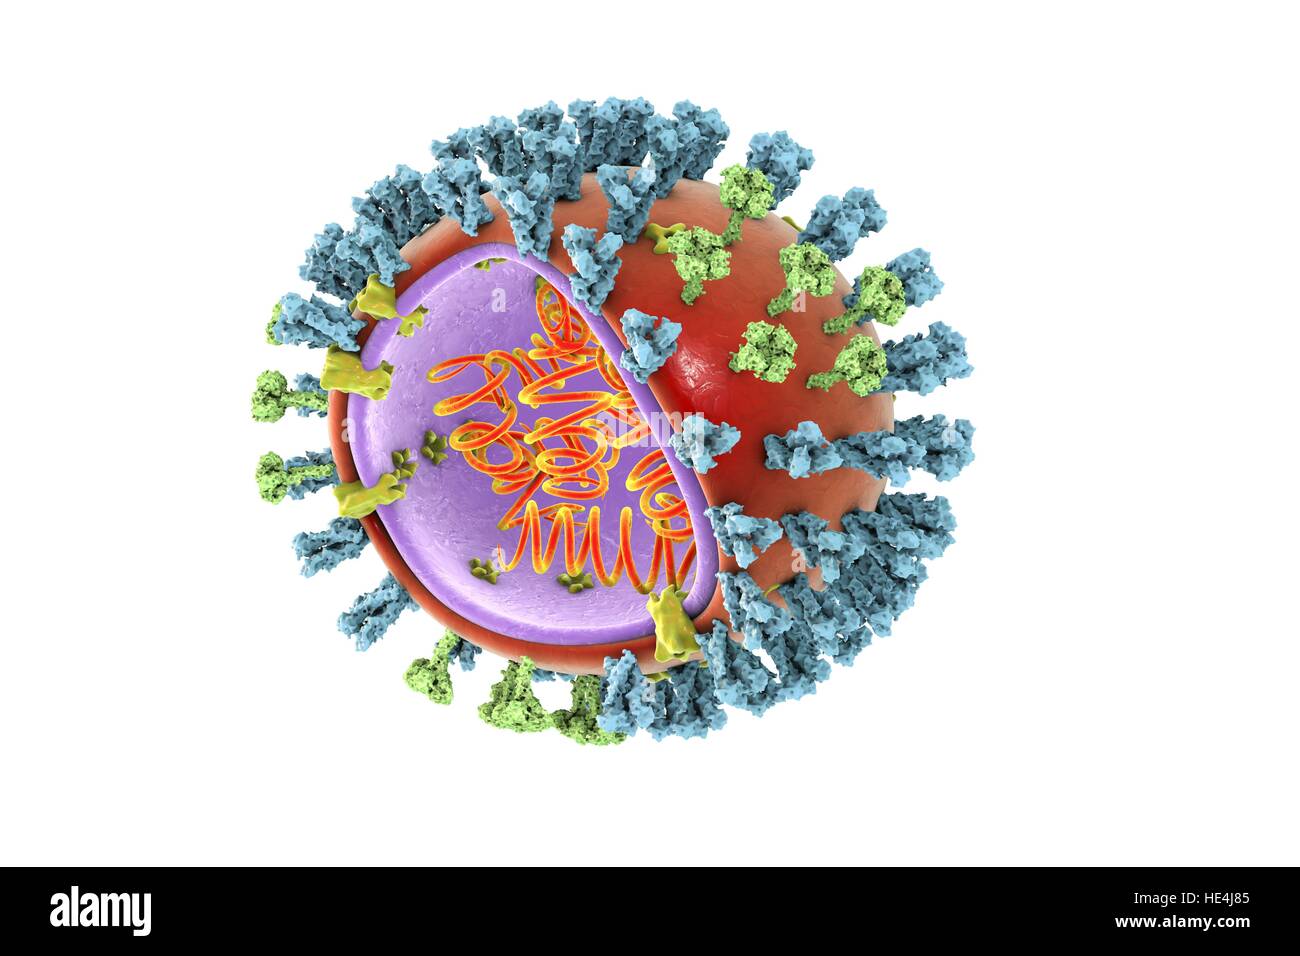 Bird flu virus.3D illustration of avian influenza H5N8 virus particle.The virus consists of ribonucleic acid (RNA,orange coils) core,surrounded by nucleocapsid (purple) lipid envelope (orange).Spanning capsid envelope are M2 proteins (yellow),that act as proton pumps.In envelope are two types of Stock Photo